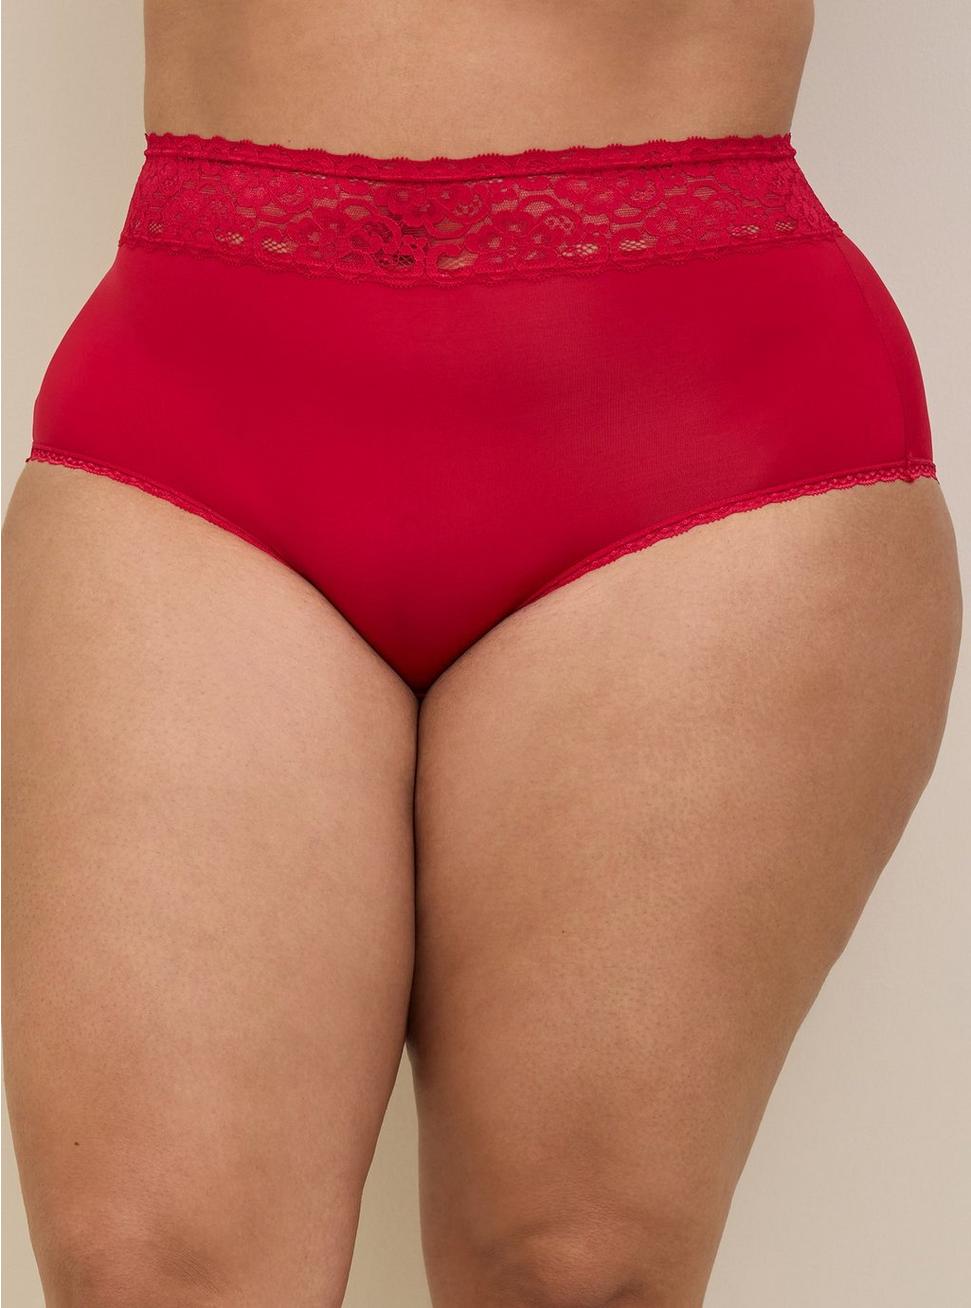 Second Skin Mid-Rise Brief Lace Trim Panty, JESTER RED, alternate